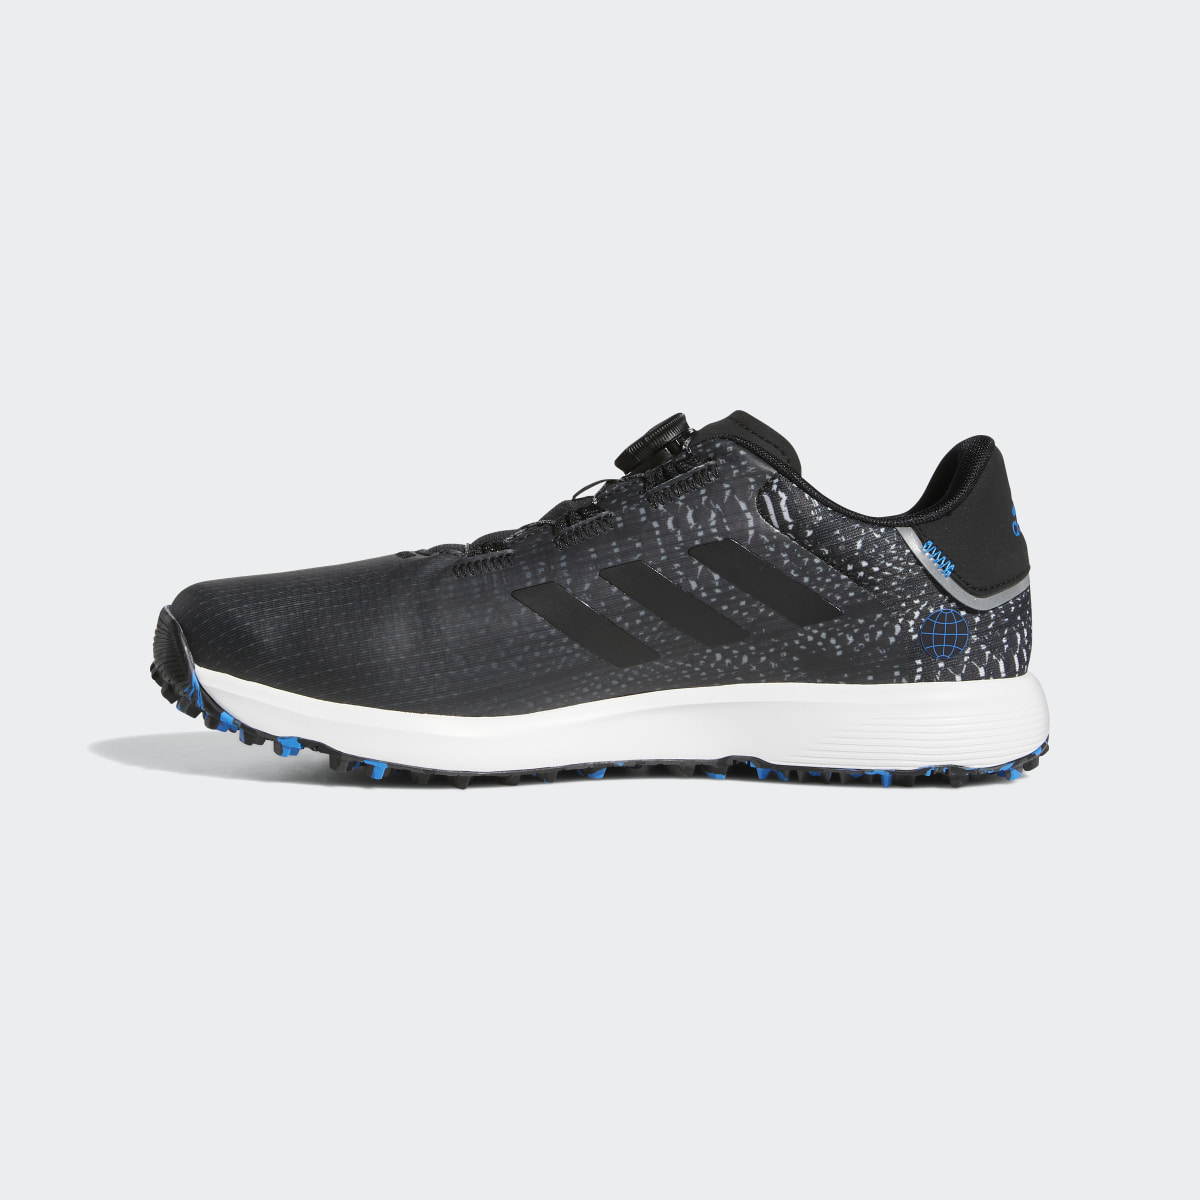 Adidas S2G BOA Wide Spikeless Golf Shoes. 7